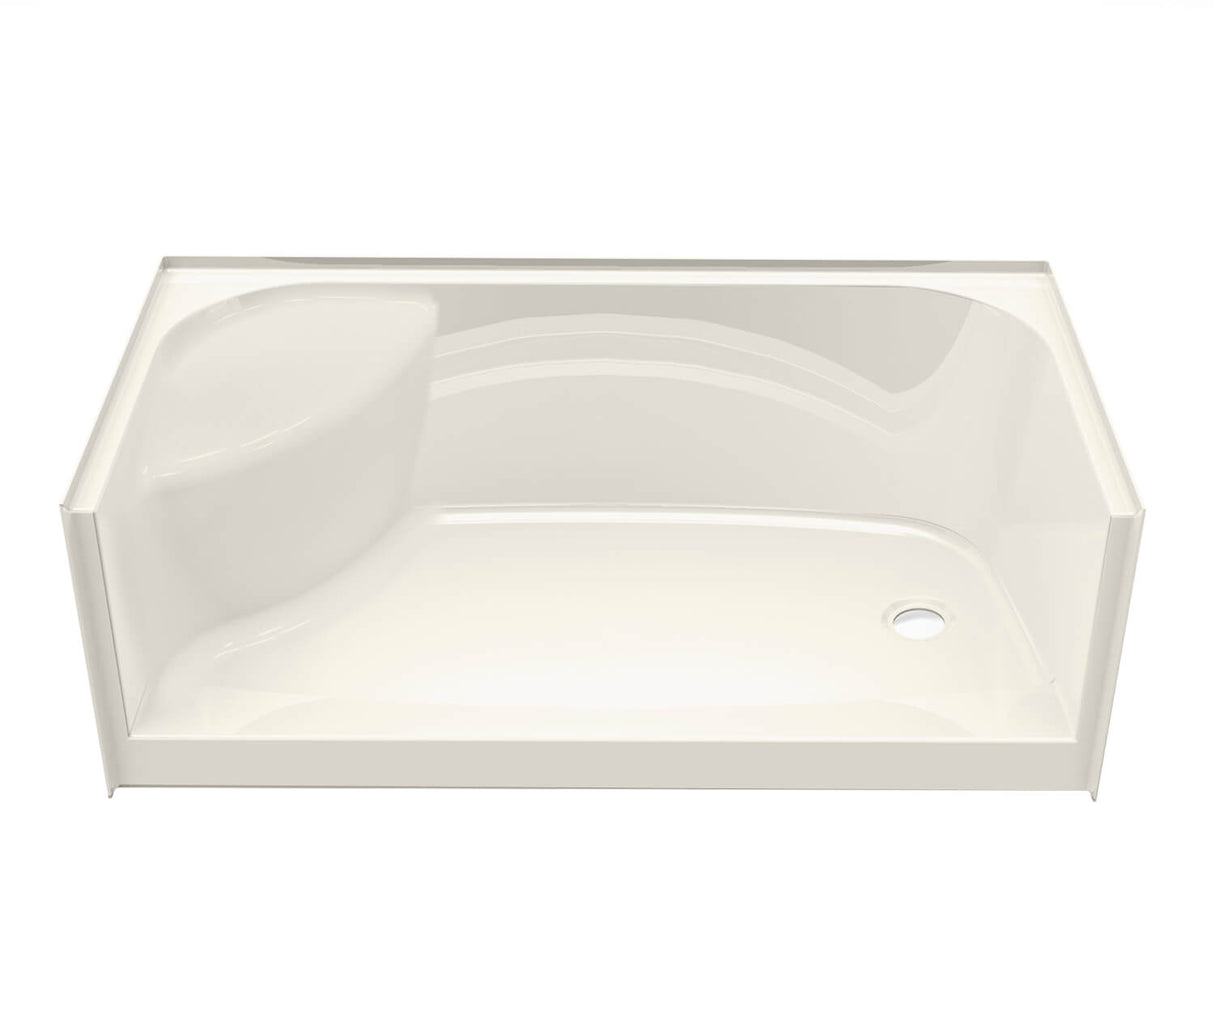 Aker SPS 3060 AFR AcrylX Alcove Center Drain Shower Base in Biscuit